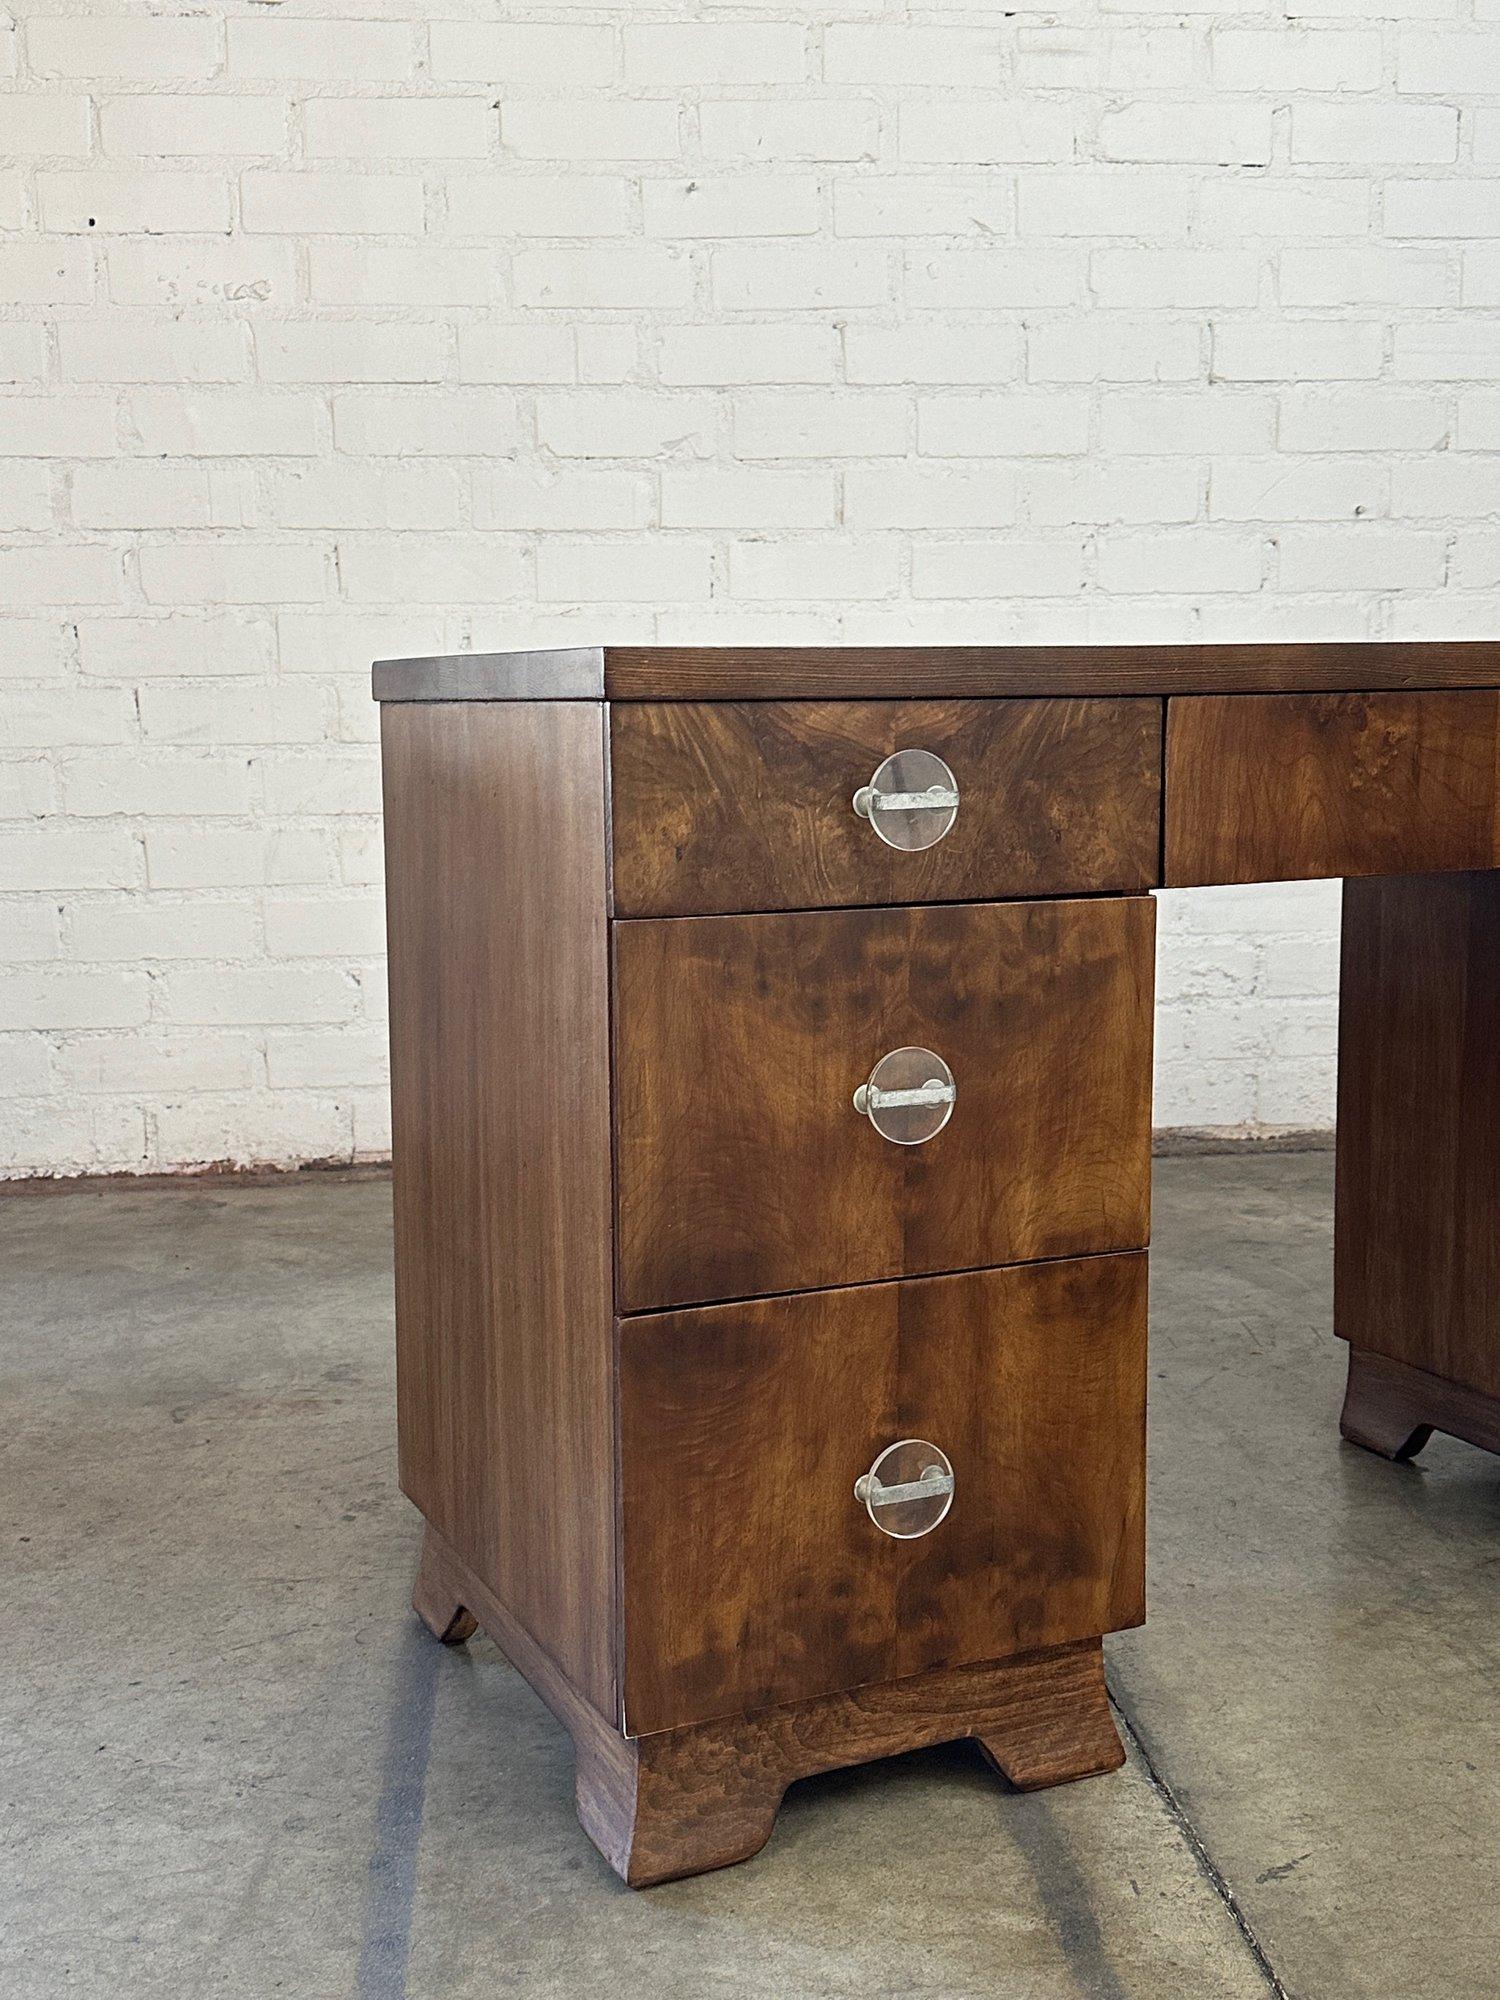 W51 D19 H29.5 KW21.5 KC23.5 KD18

Vintage Fully Restored Desk with a Medium Walnut Finish. Item is structurally sound and fully functional. Desk features very unique hardware and burl wood fronts. 